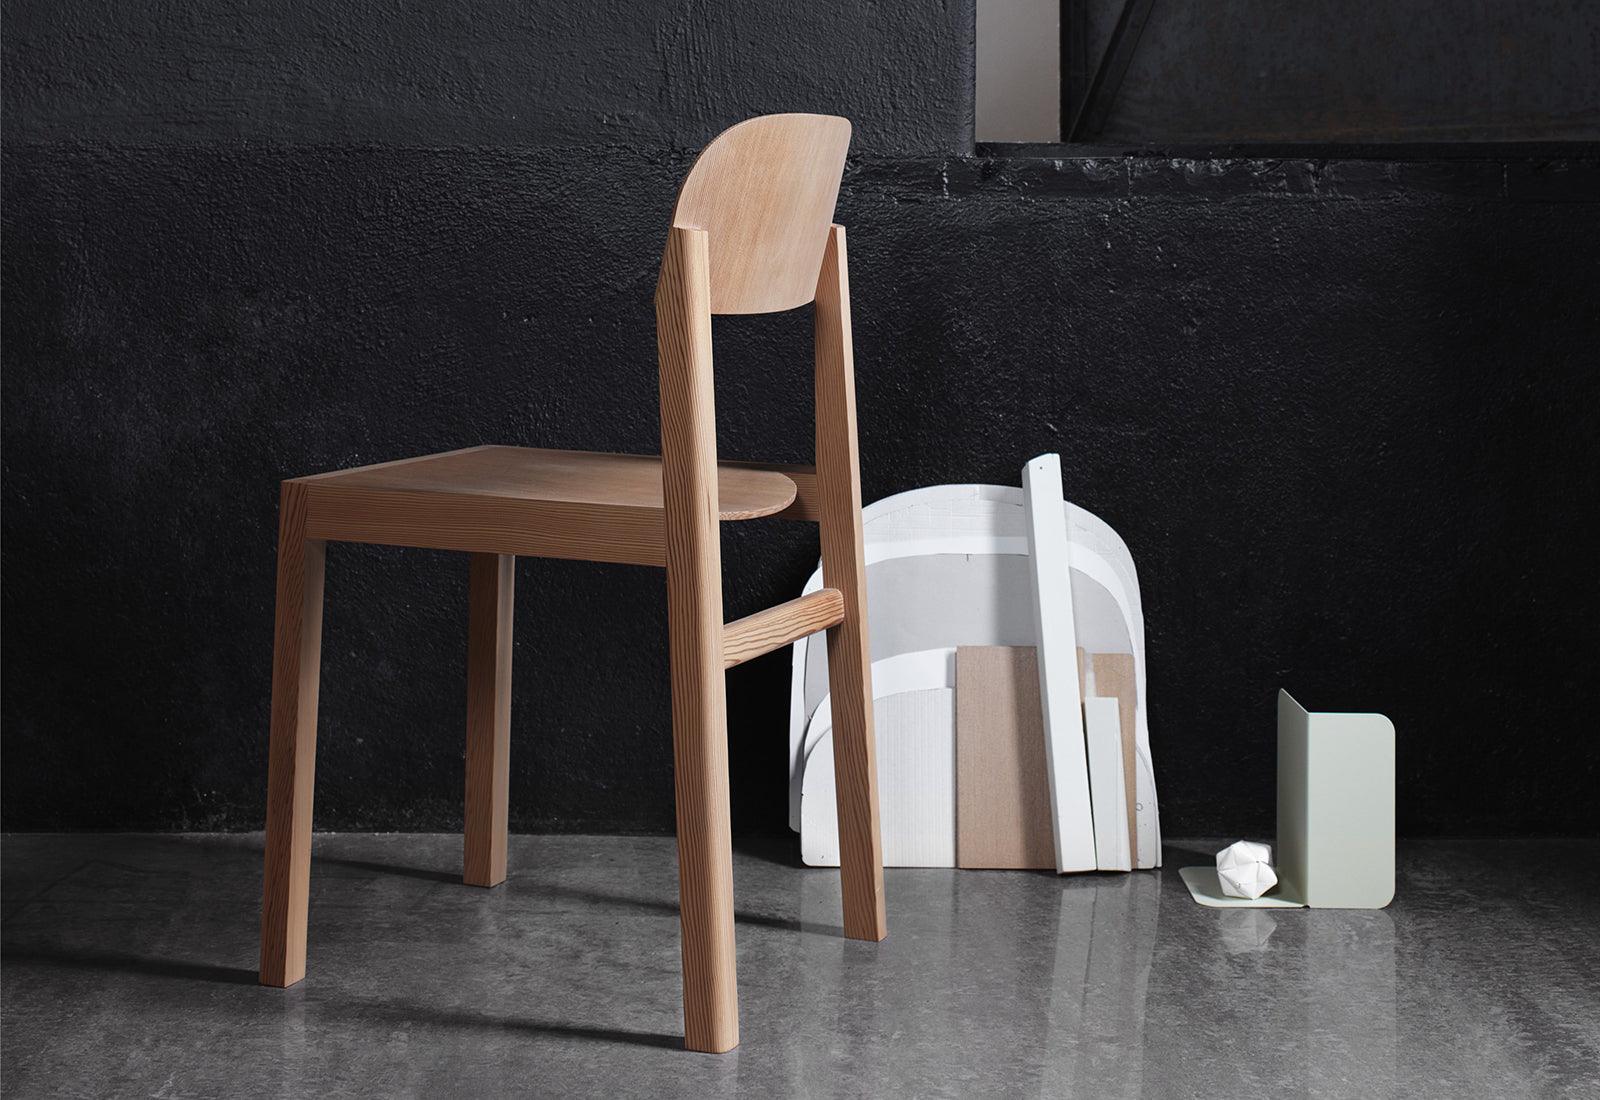  Workshop chair by Cecilie Manz for Muuto in front of a black wall.